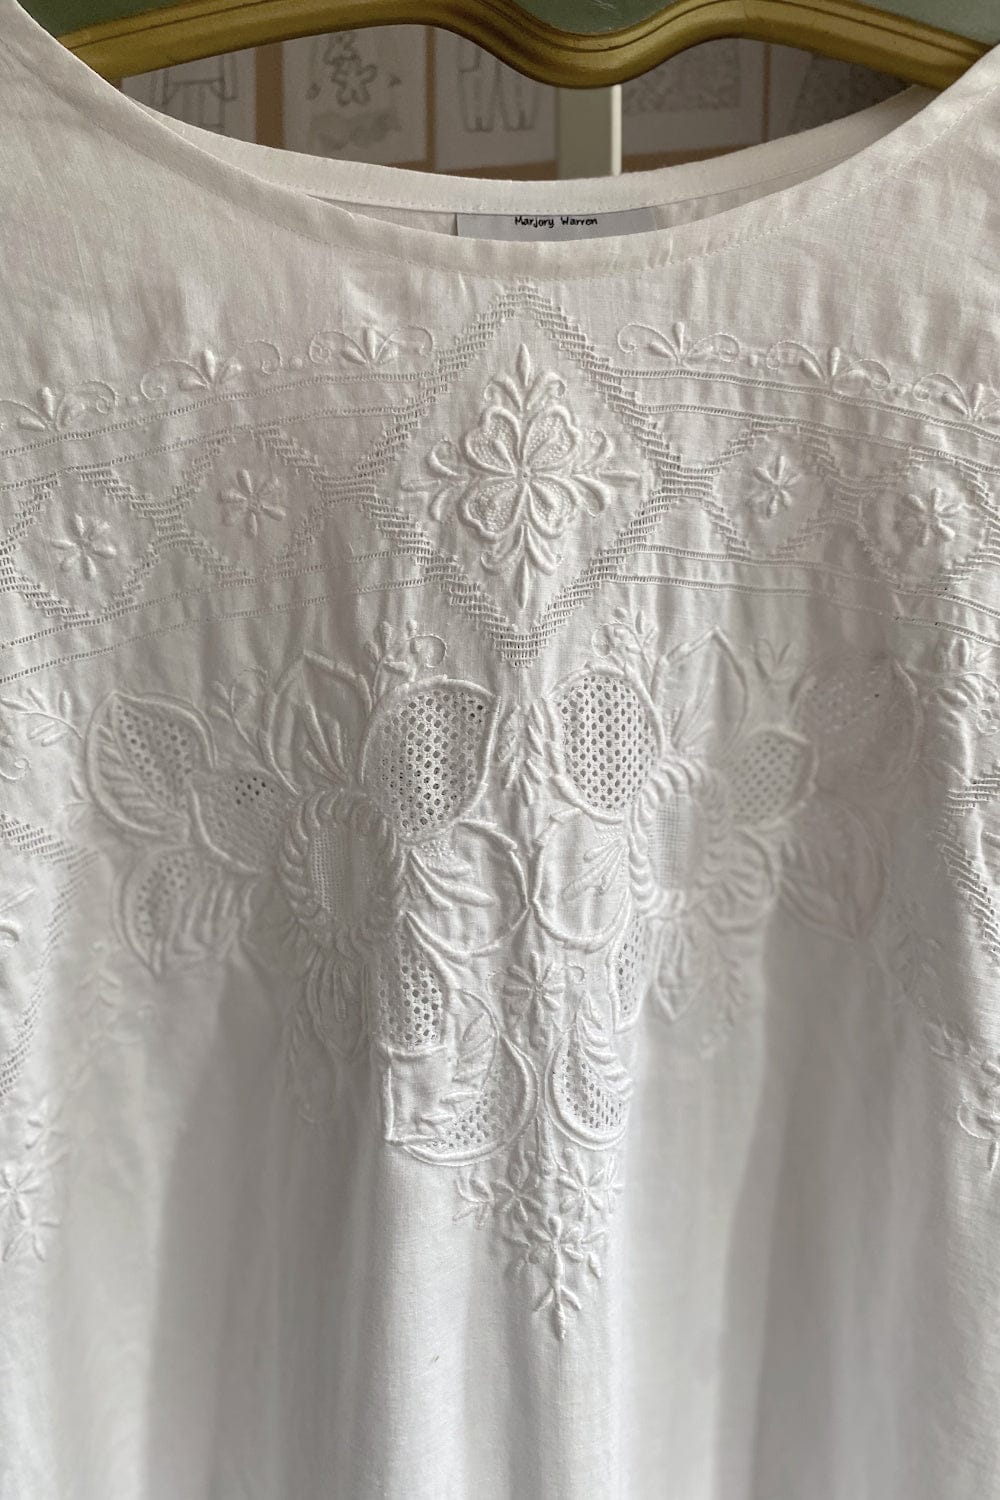 Close up of vintage tablecloth dress neckline and delicate stitching detail.